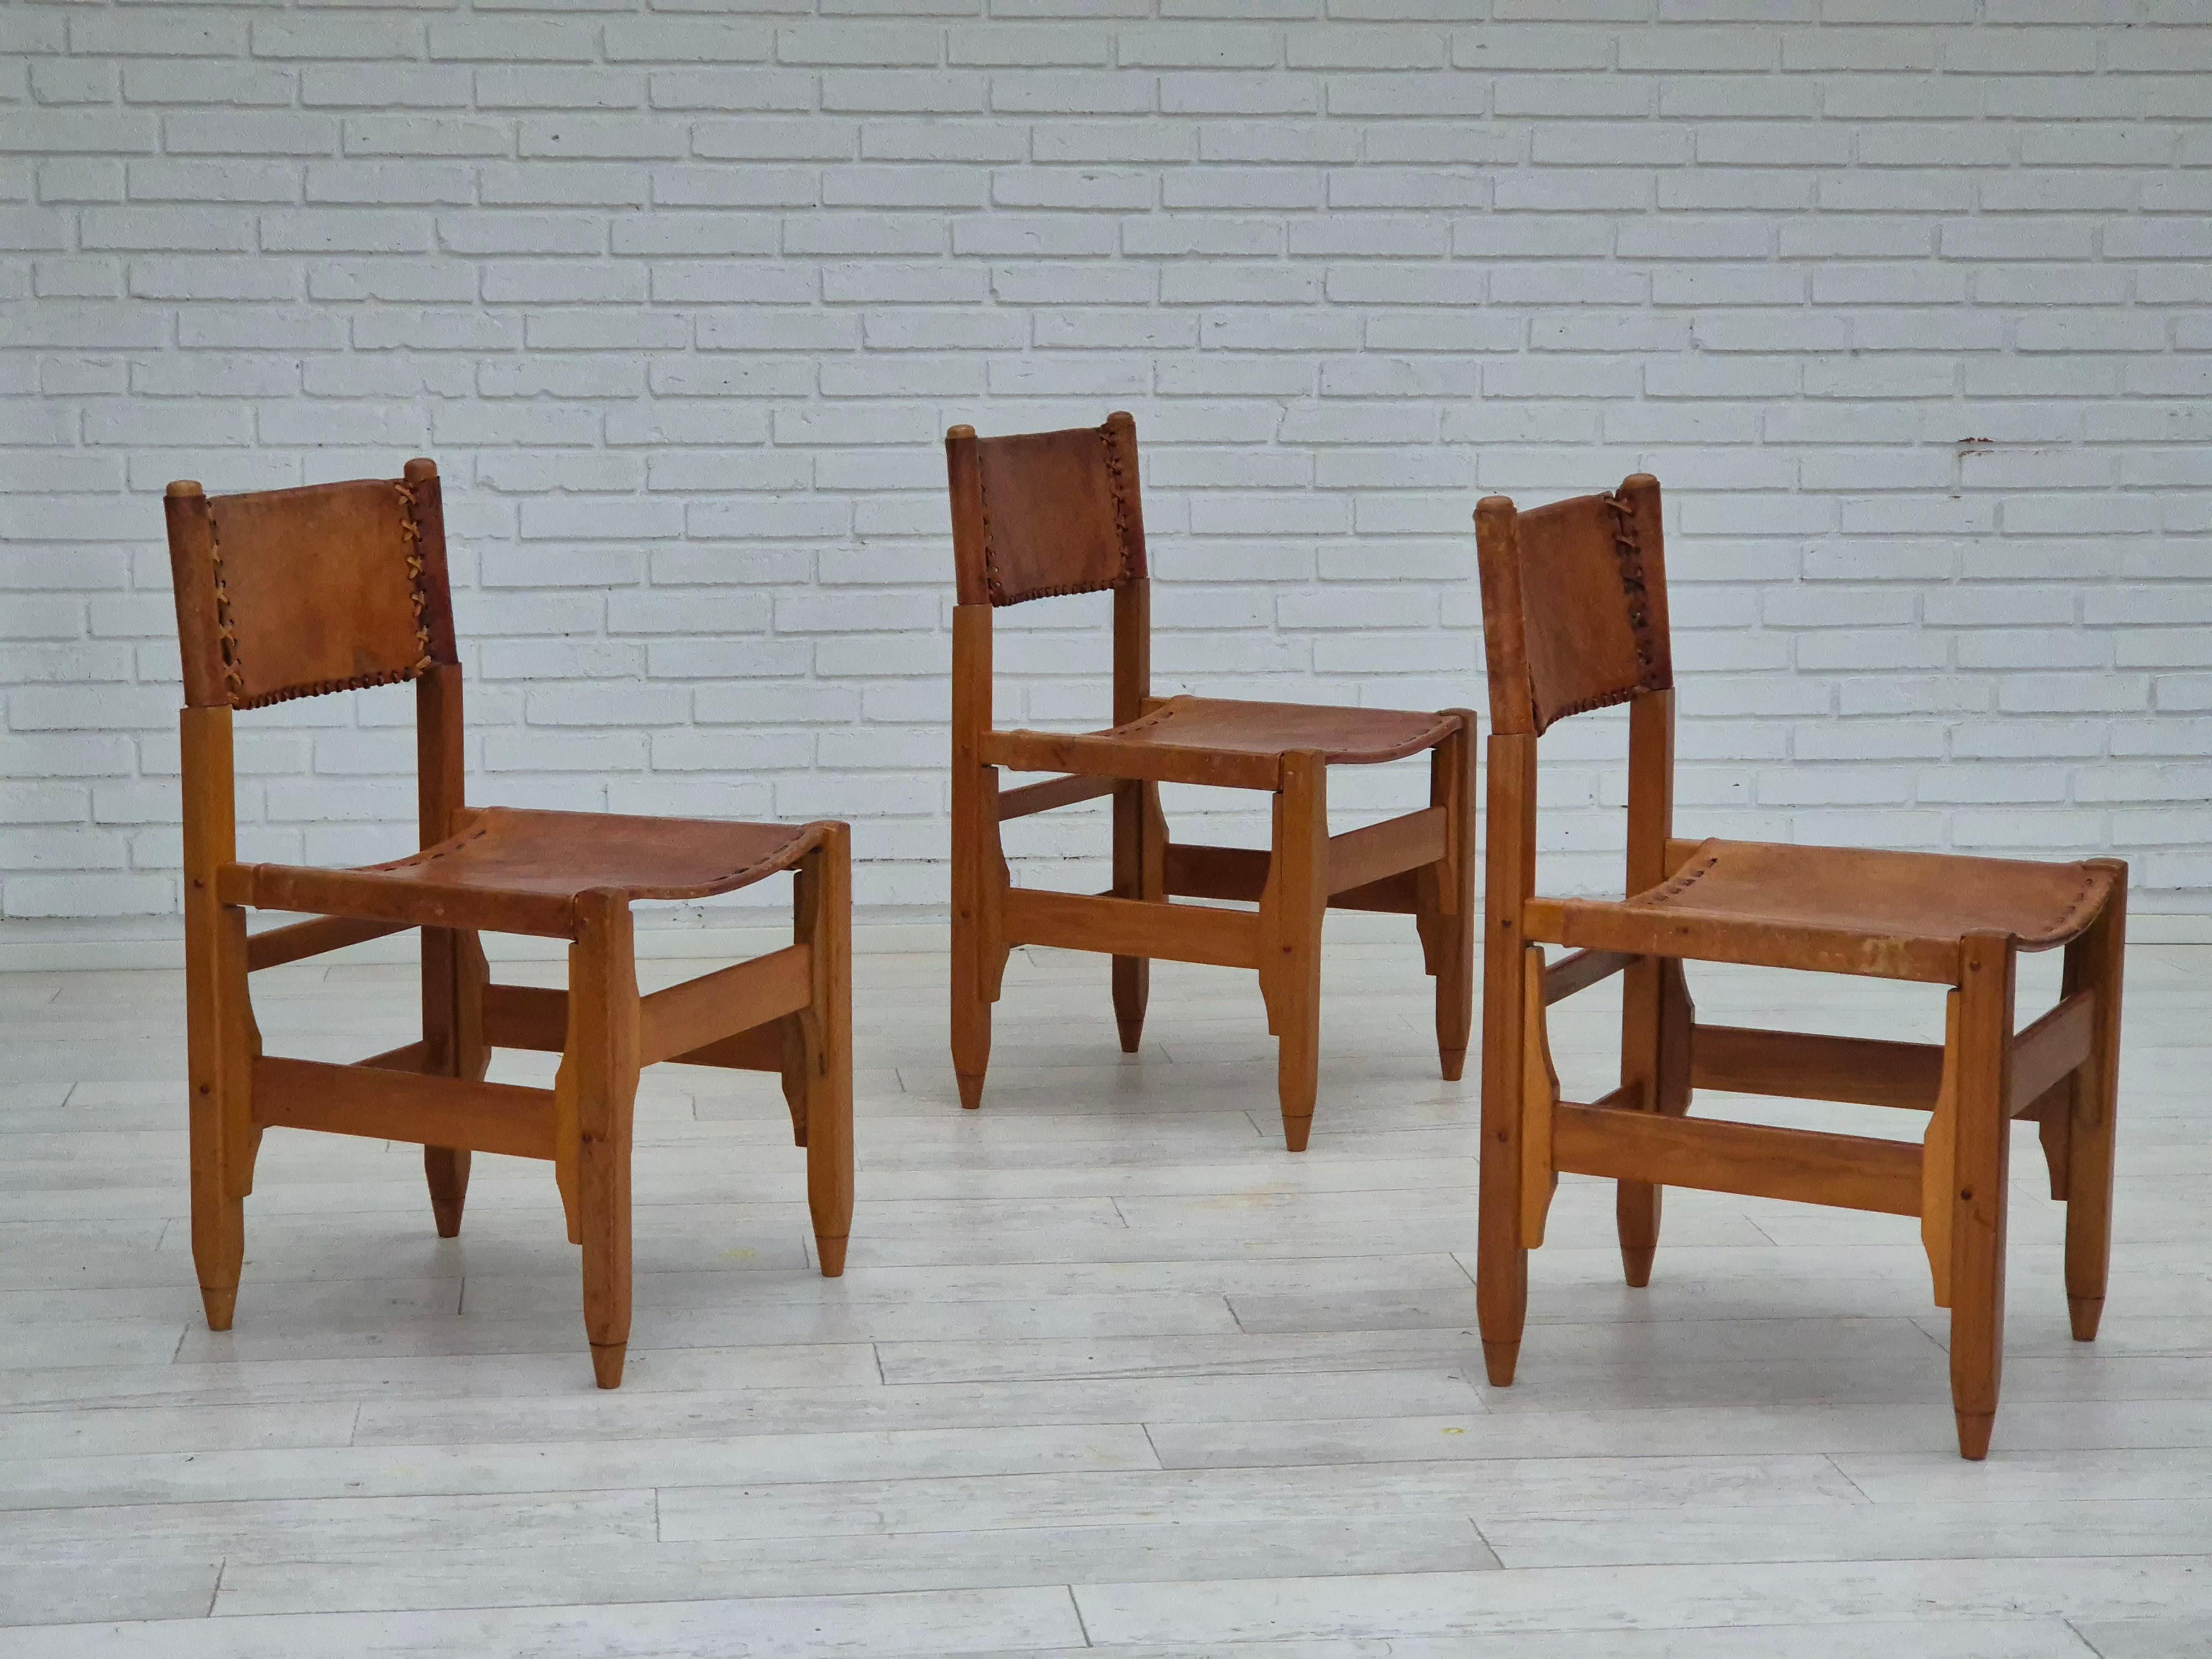 1960s, Werner Biermann design for Arte Sano. Set of three chairs in original good condition. Hand tanned leather with very nice patina. Leather, Columbian oak wood. Manufactured in about 1960s.